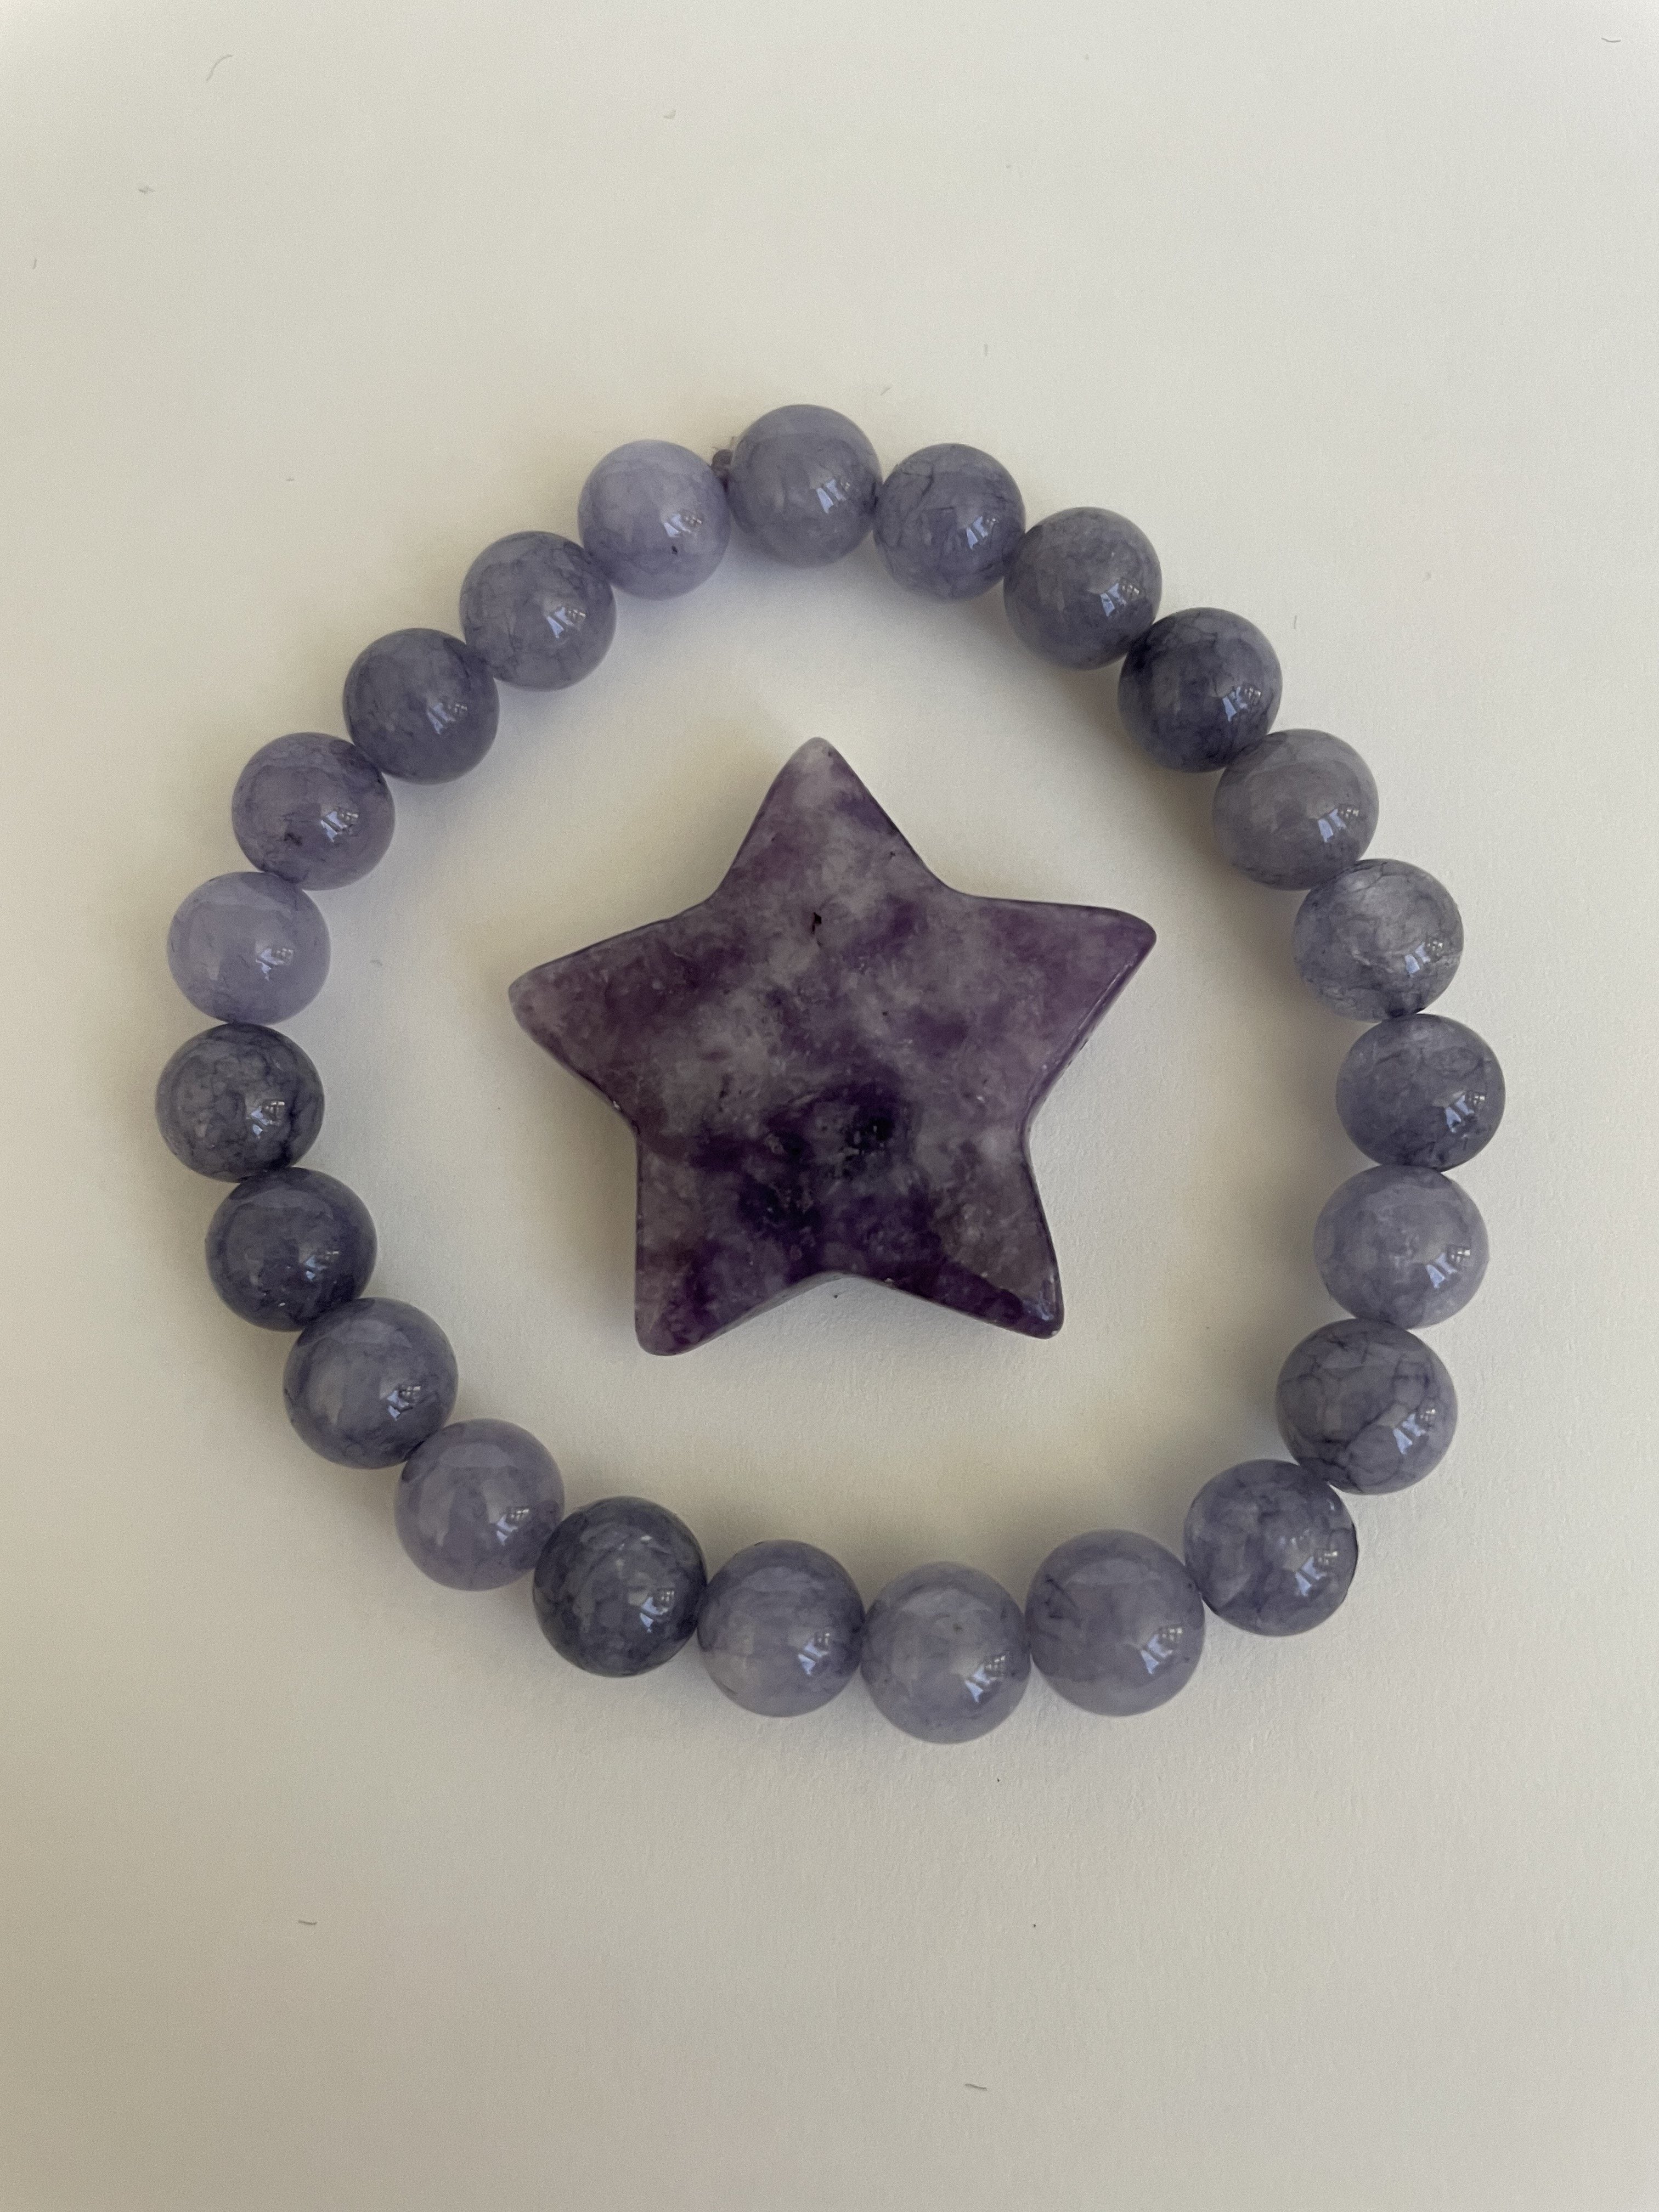 This lovely little Lepidolite star can be used for meditation, healing, for your altar, on your computer to clear EMRs, or as décor for any room in your home or office. Easy to slip right into your pocket so you have the energy of lepidolite everywhere you go. Approximately 1¼". Cost is $6.